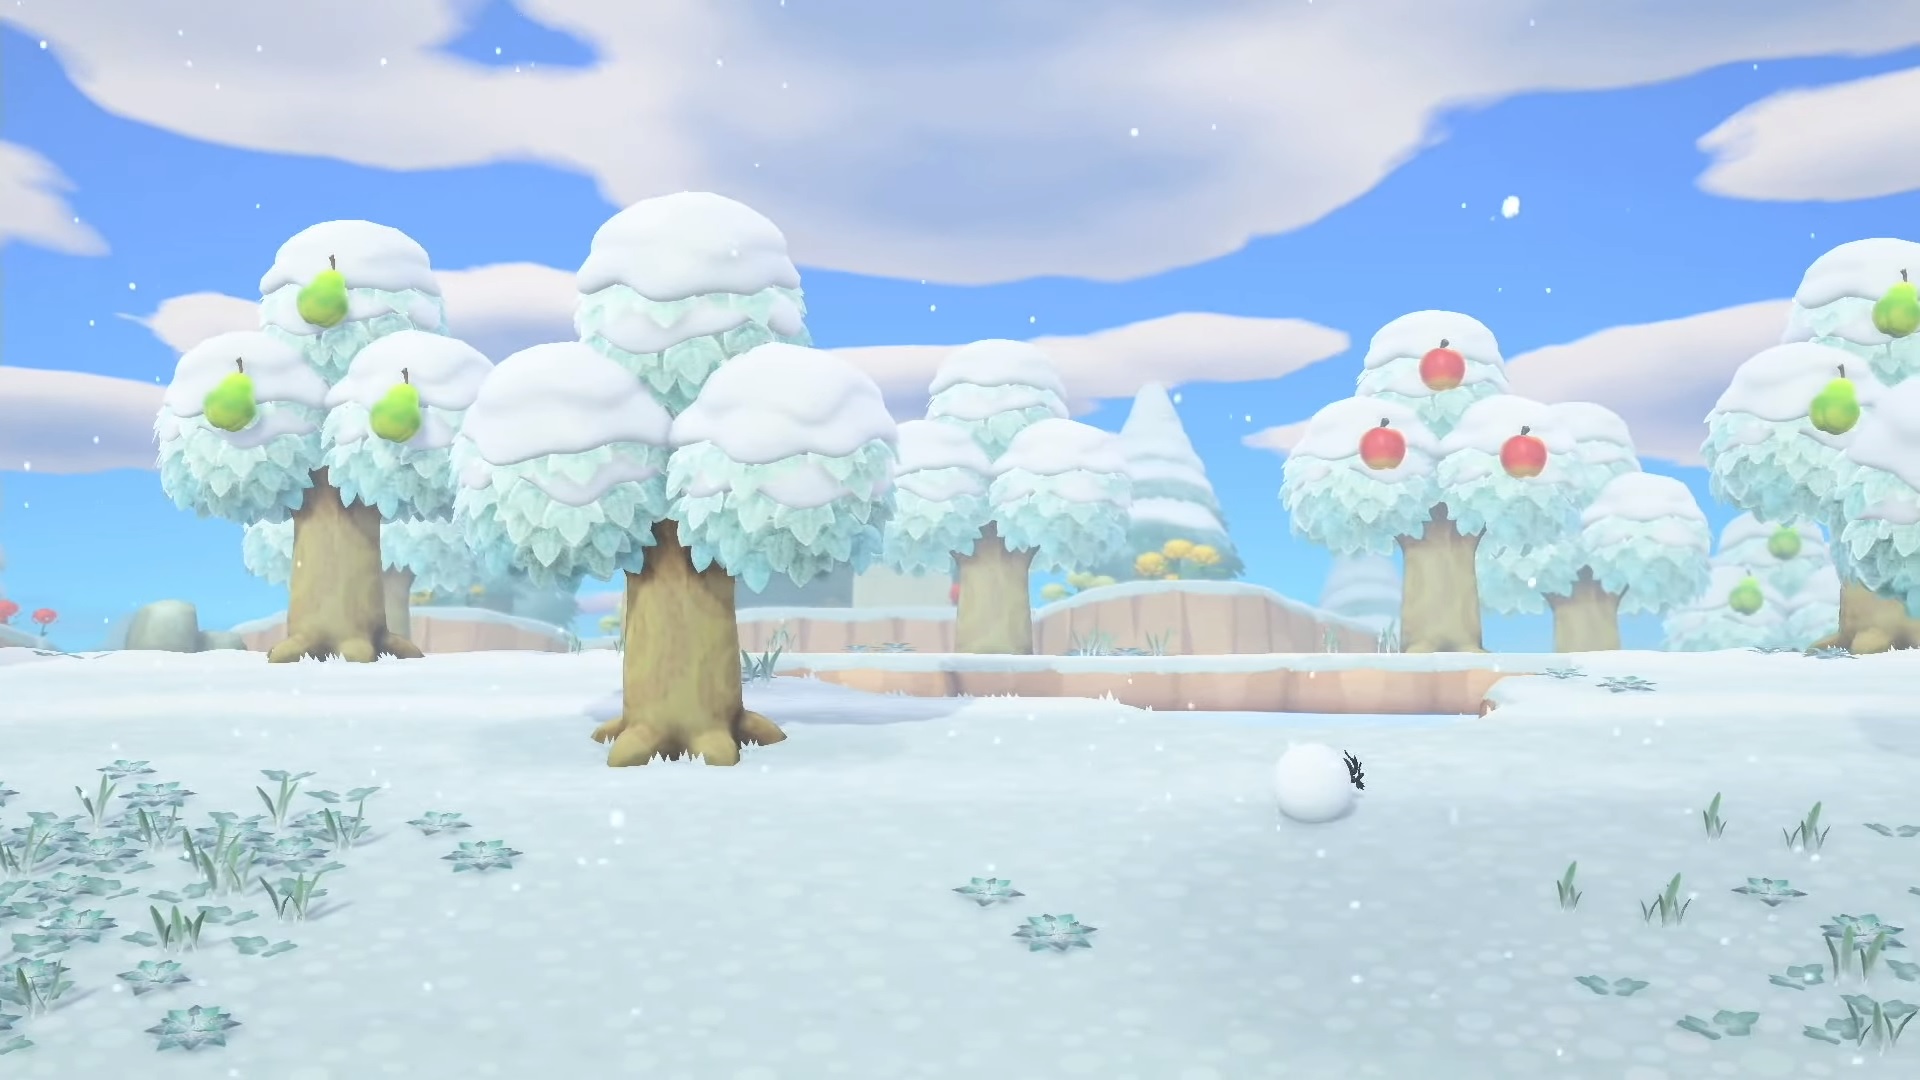 screenshot of a wintery forest with fruit on the ground covered in snow, animal crossing new horizons winter settings